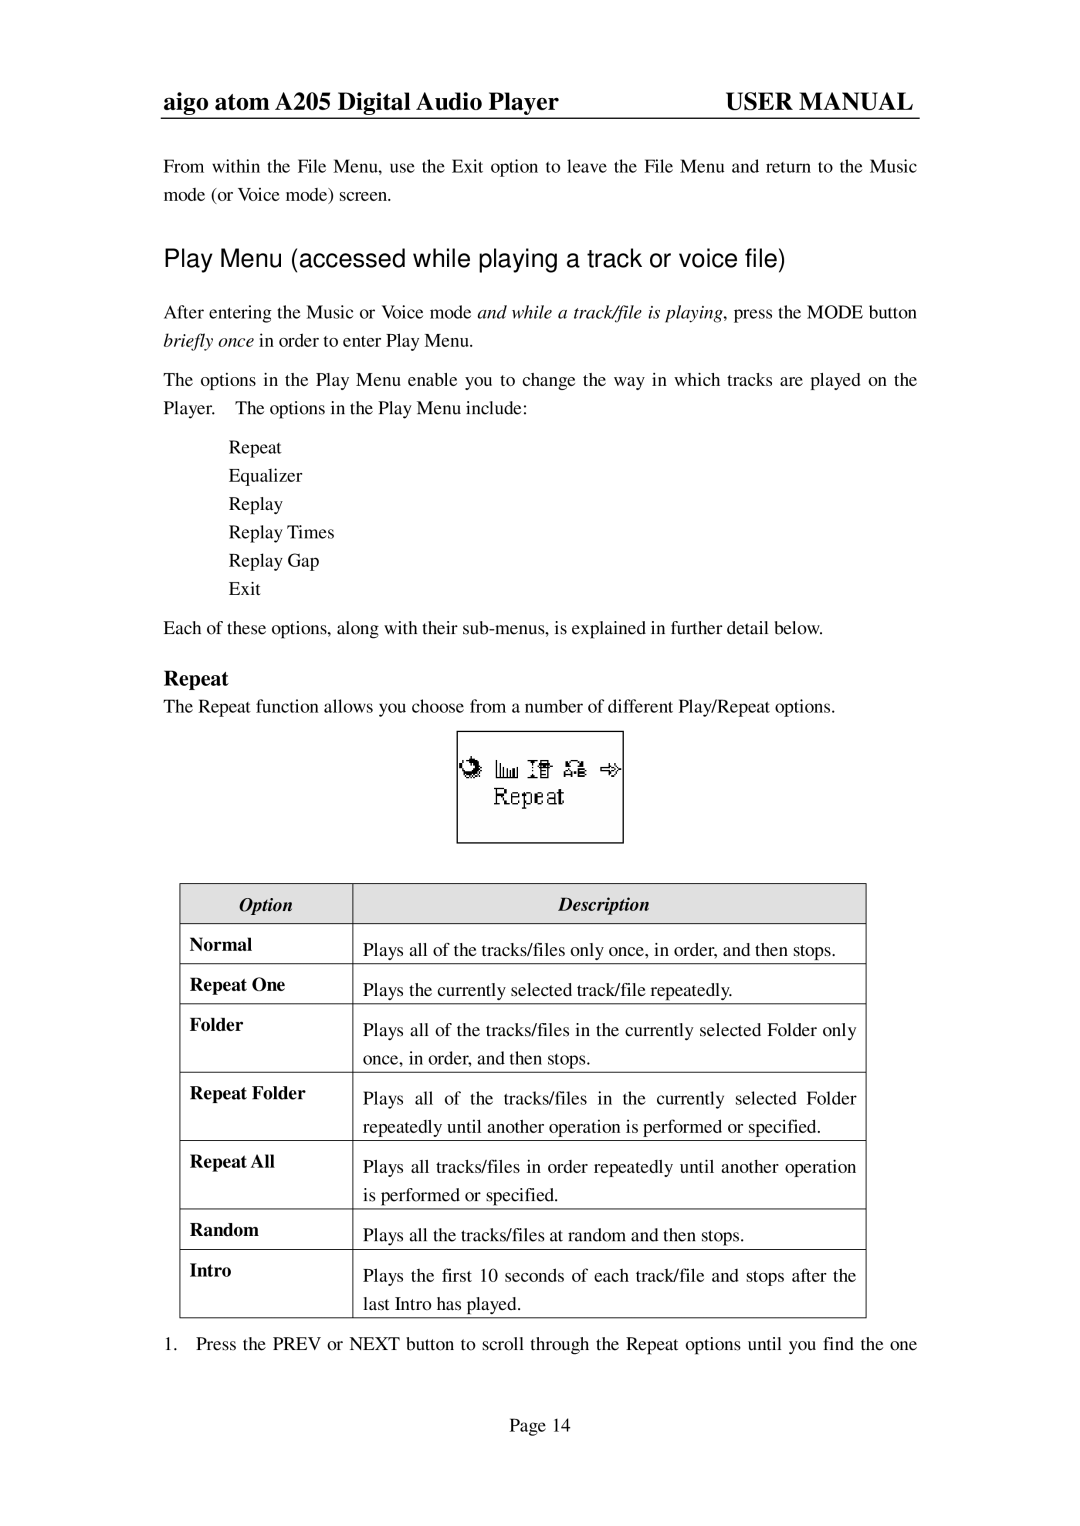 Aigo atom A205 user manual Play Menu accessed while playing a track or voice file, Repeat 